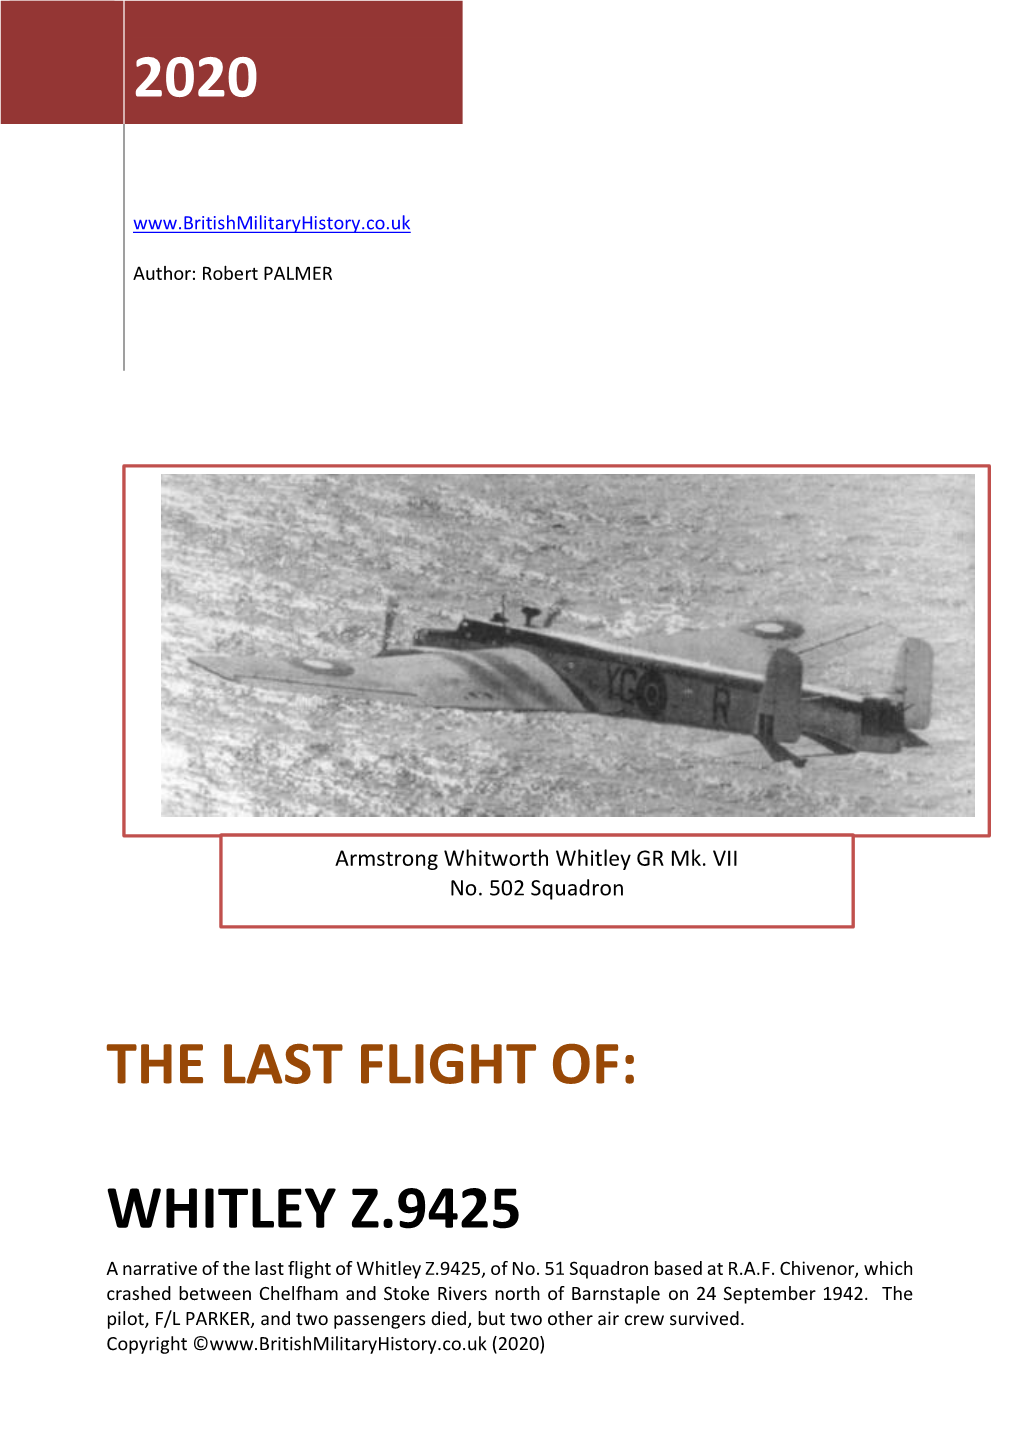 The Last Flight of Whitley Z.9425, of No